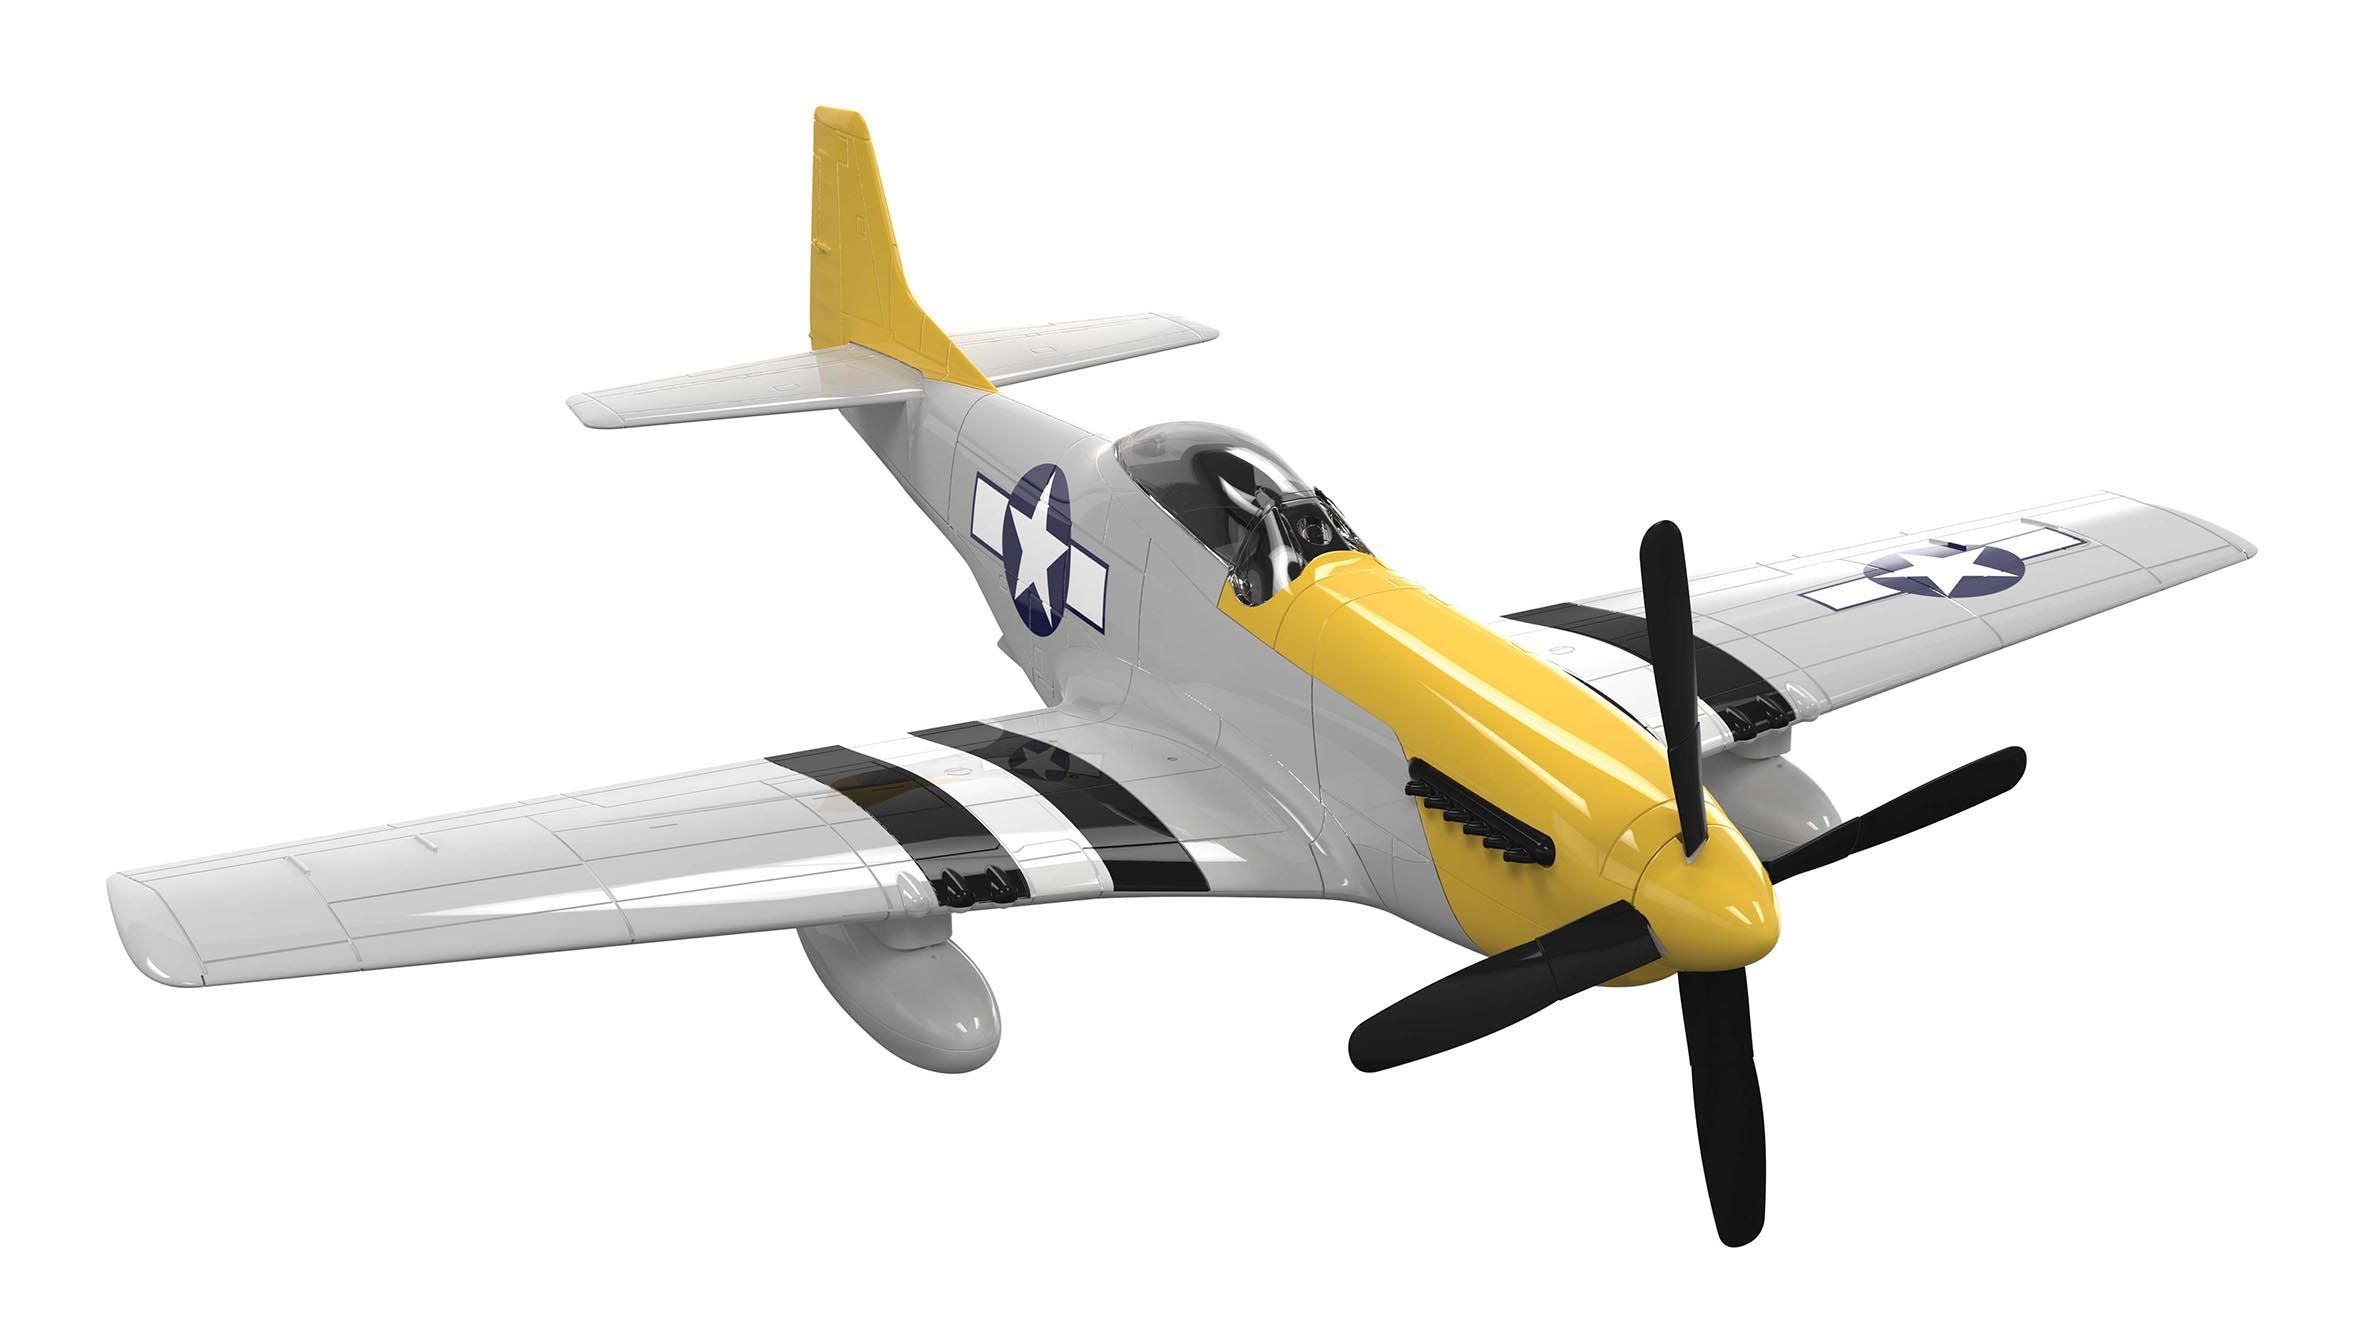 QUICKBUILD P-51D Mustang - Loaded Dice Barry Vale of Glamorgan CF64 3HD